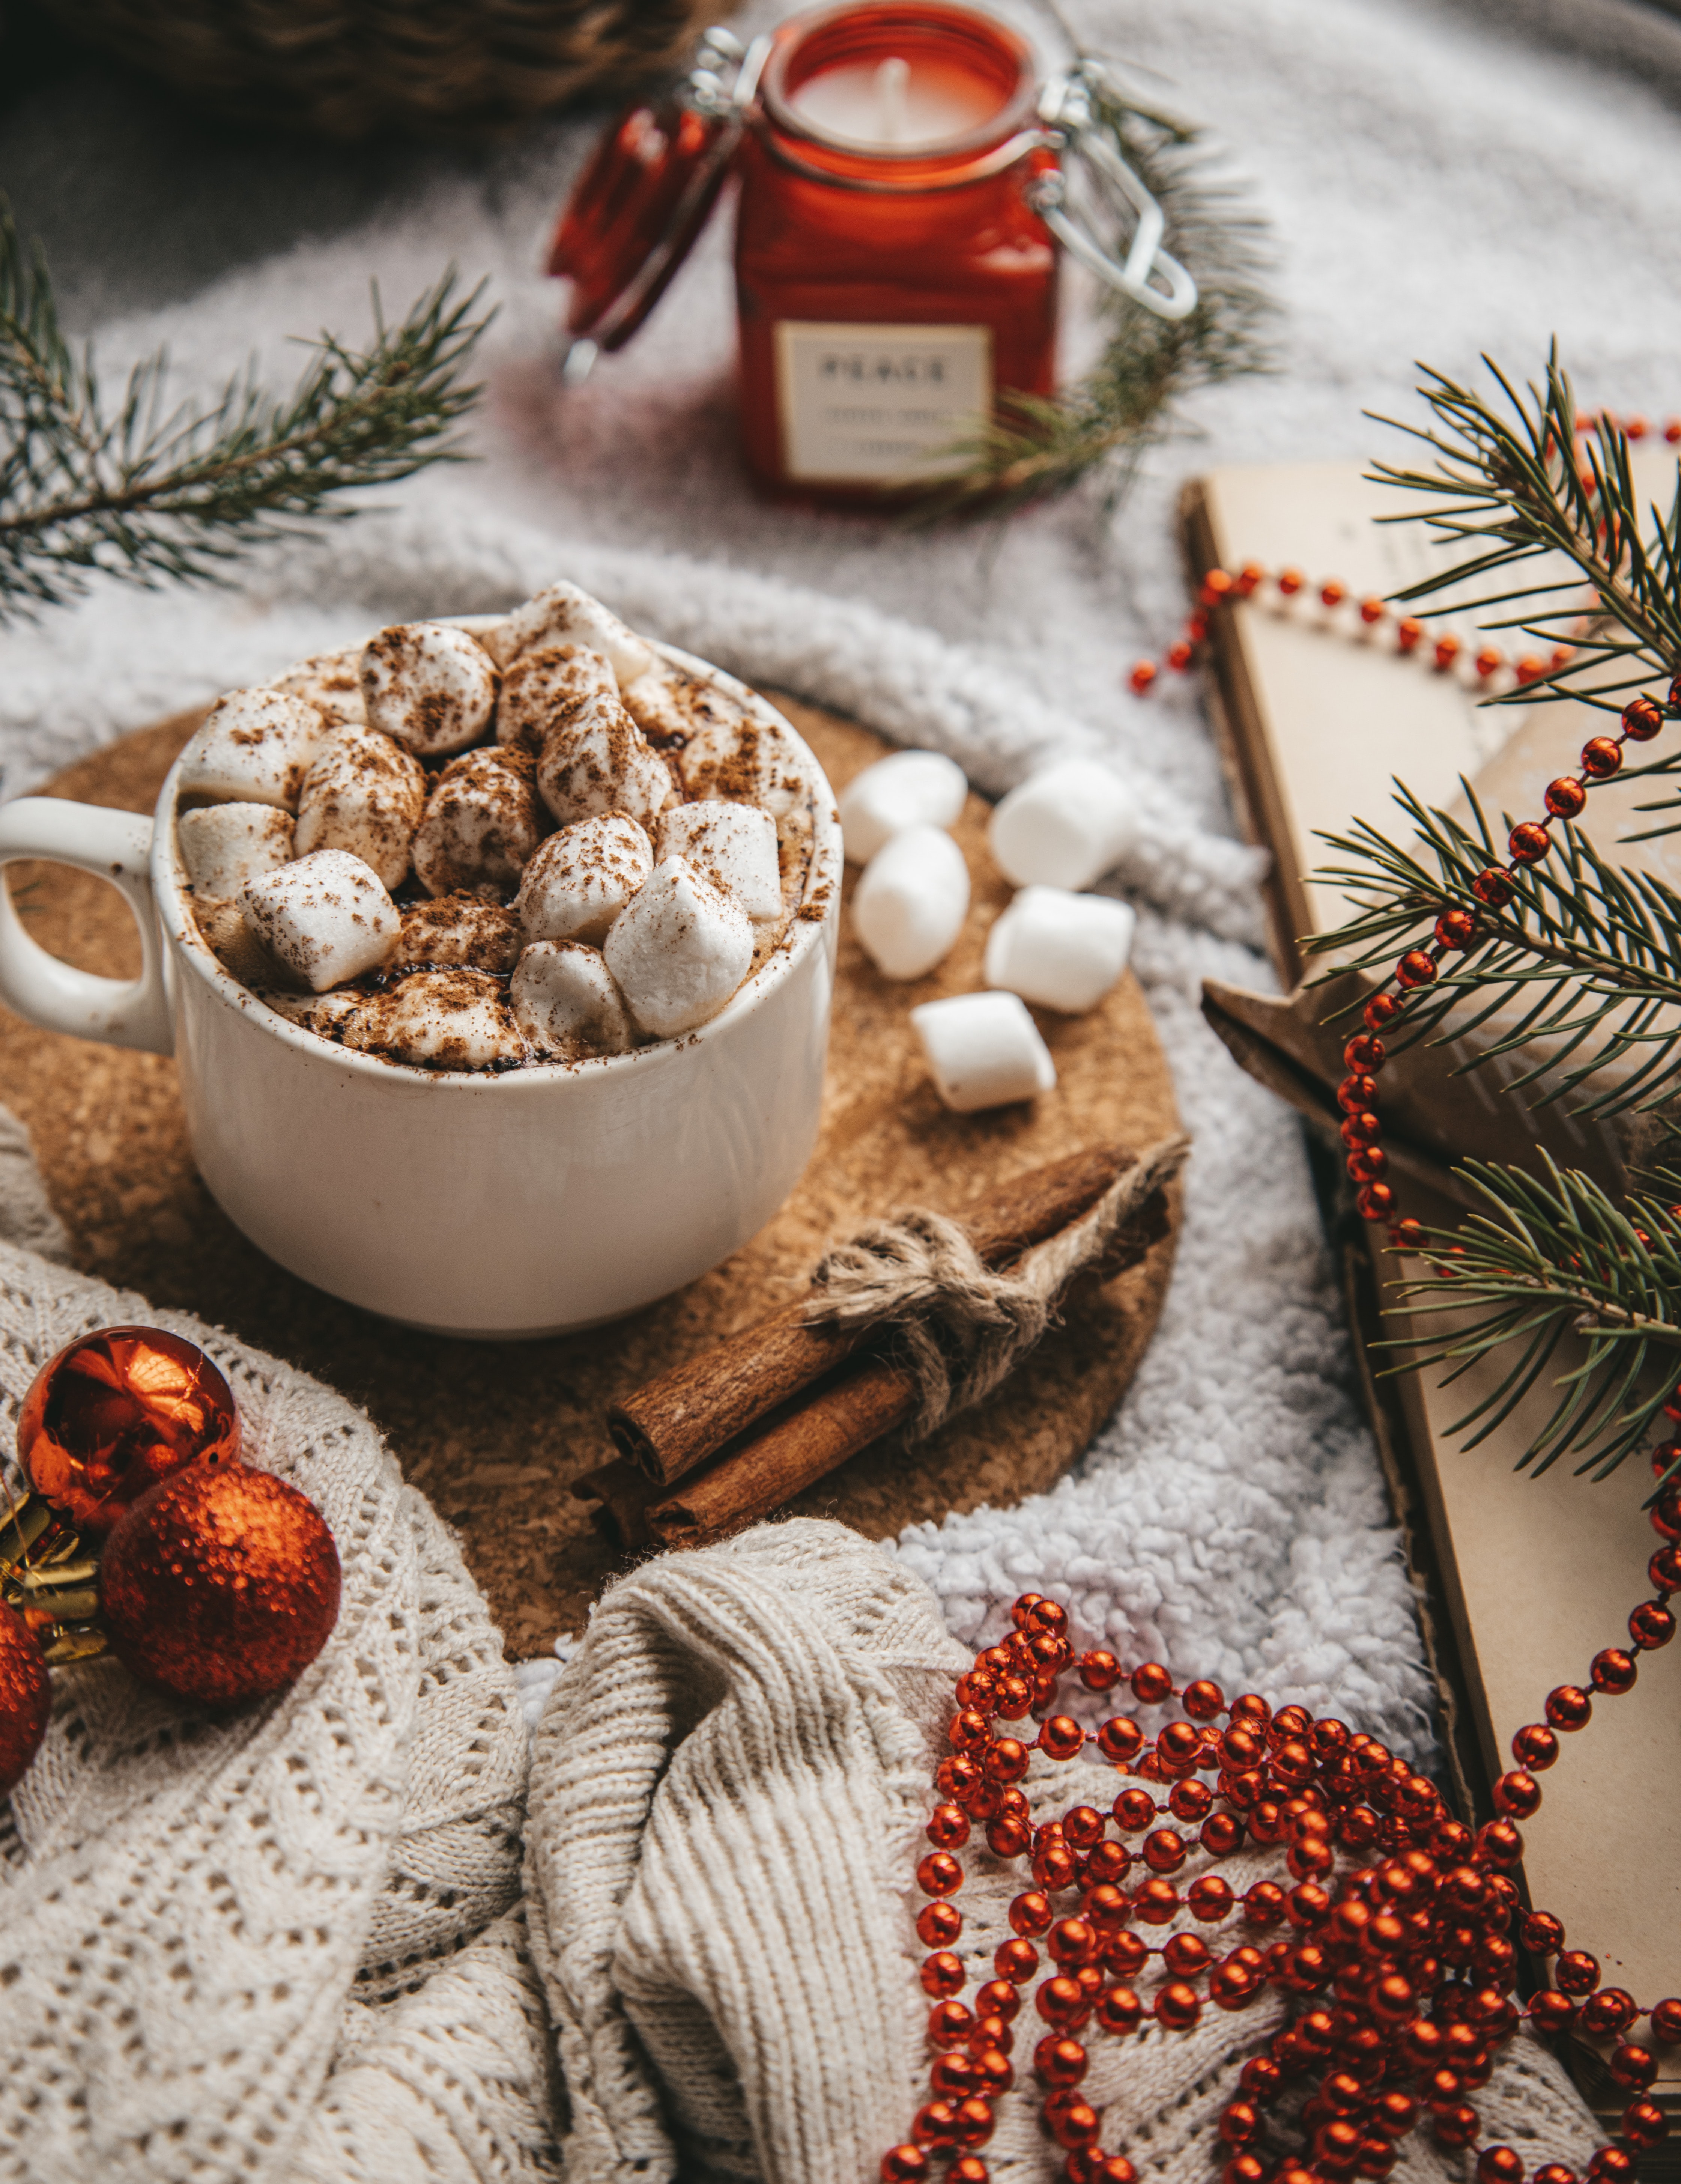 Create a cozy holiday atmosphere with hot chocolate and cookies.